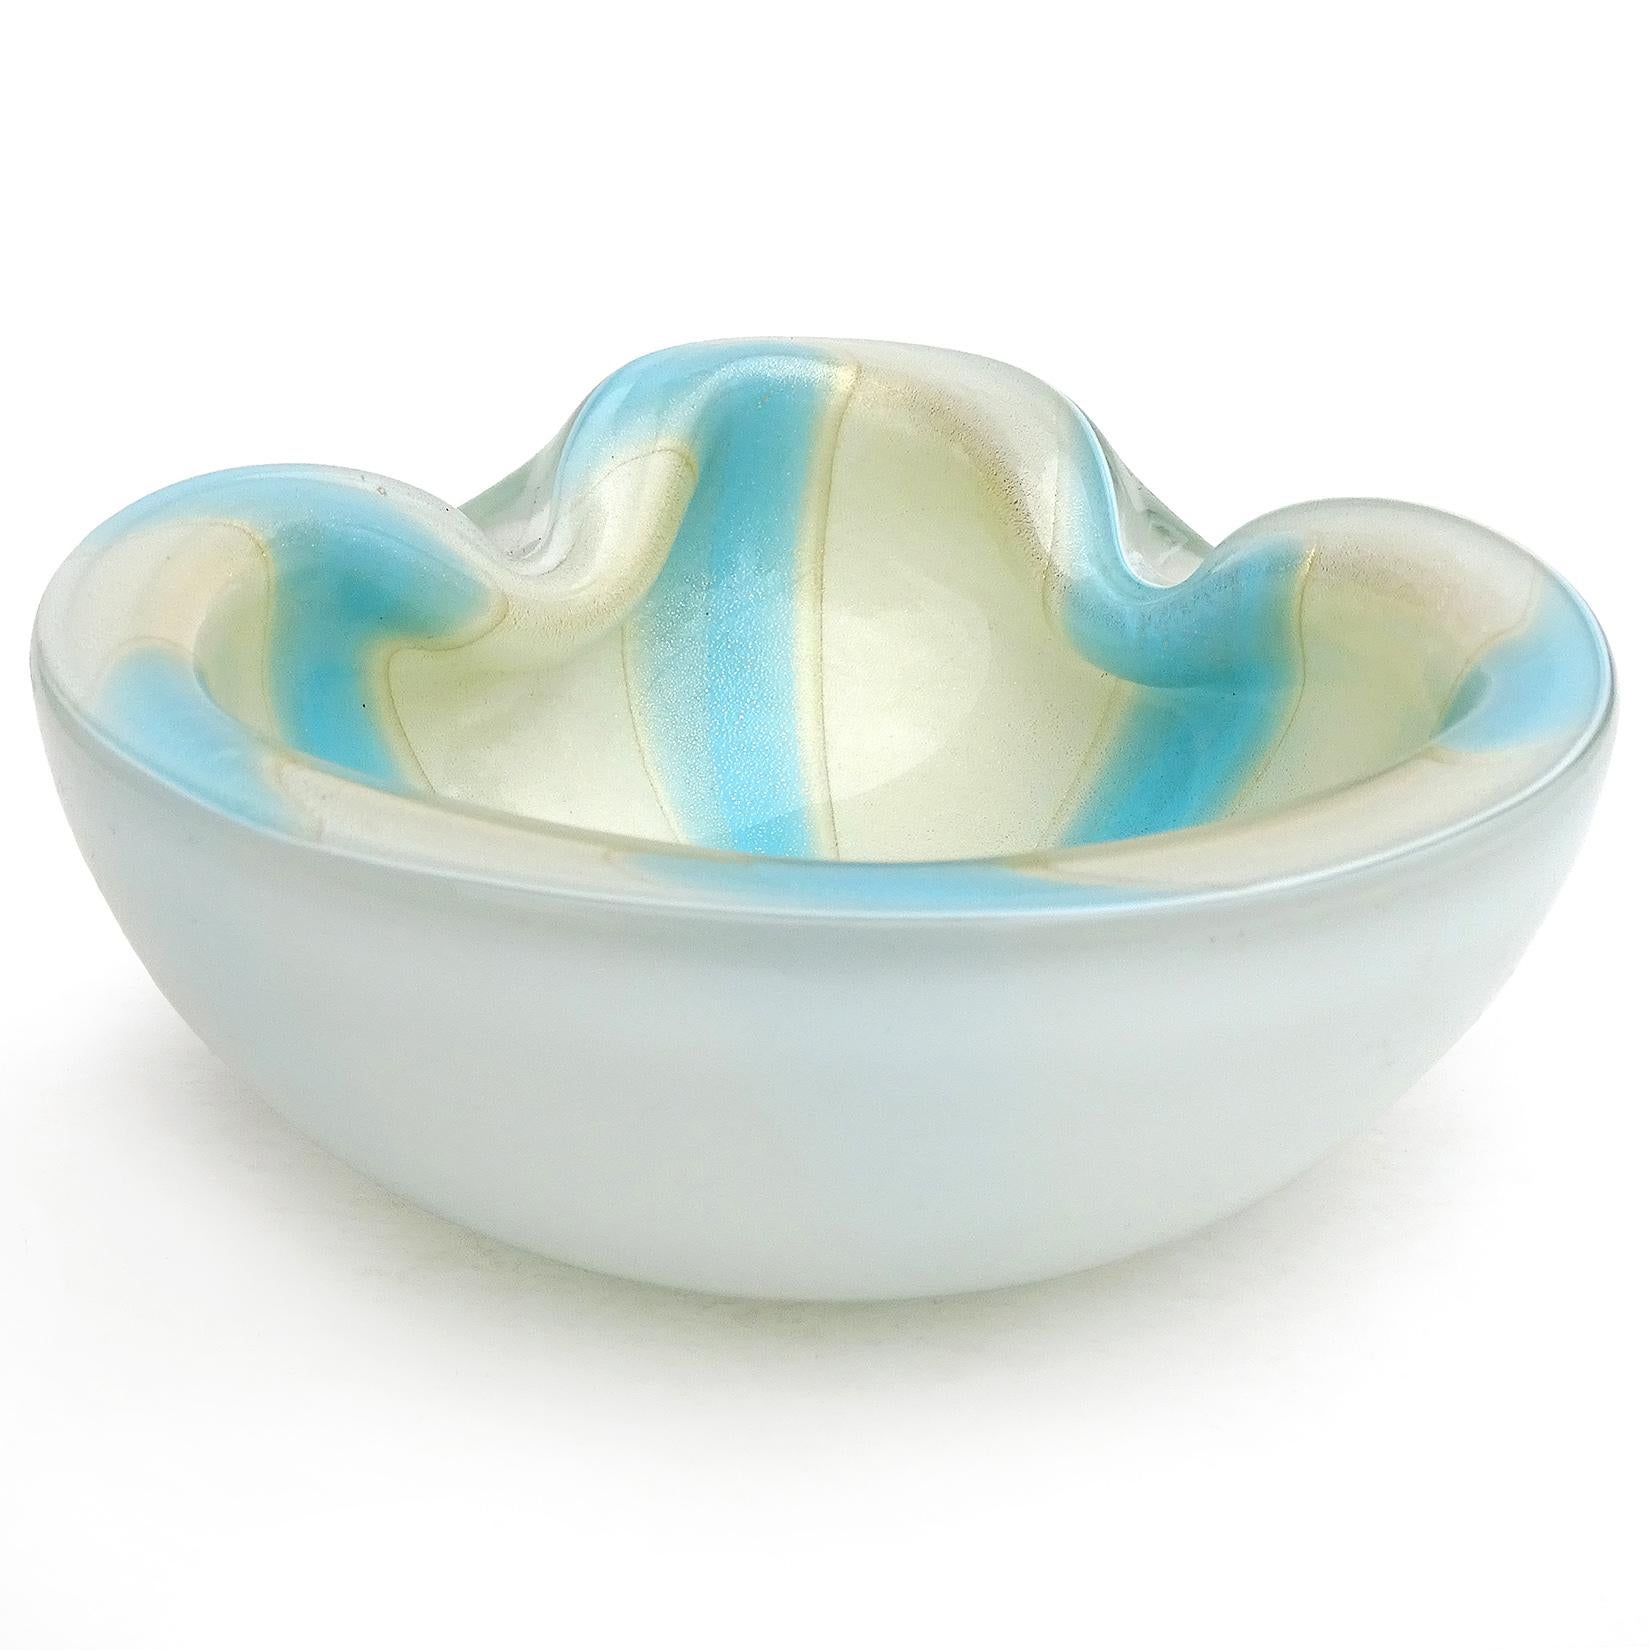 Price Per Item (2 available). Beautiful vintage Murano hand blown white, blue stripes and gold flecks Italian art glass bowl. Documented to designer Alfredo Barbini, circa 1950-1960. Published in his catalog. Can be used a display piece on any